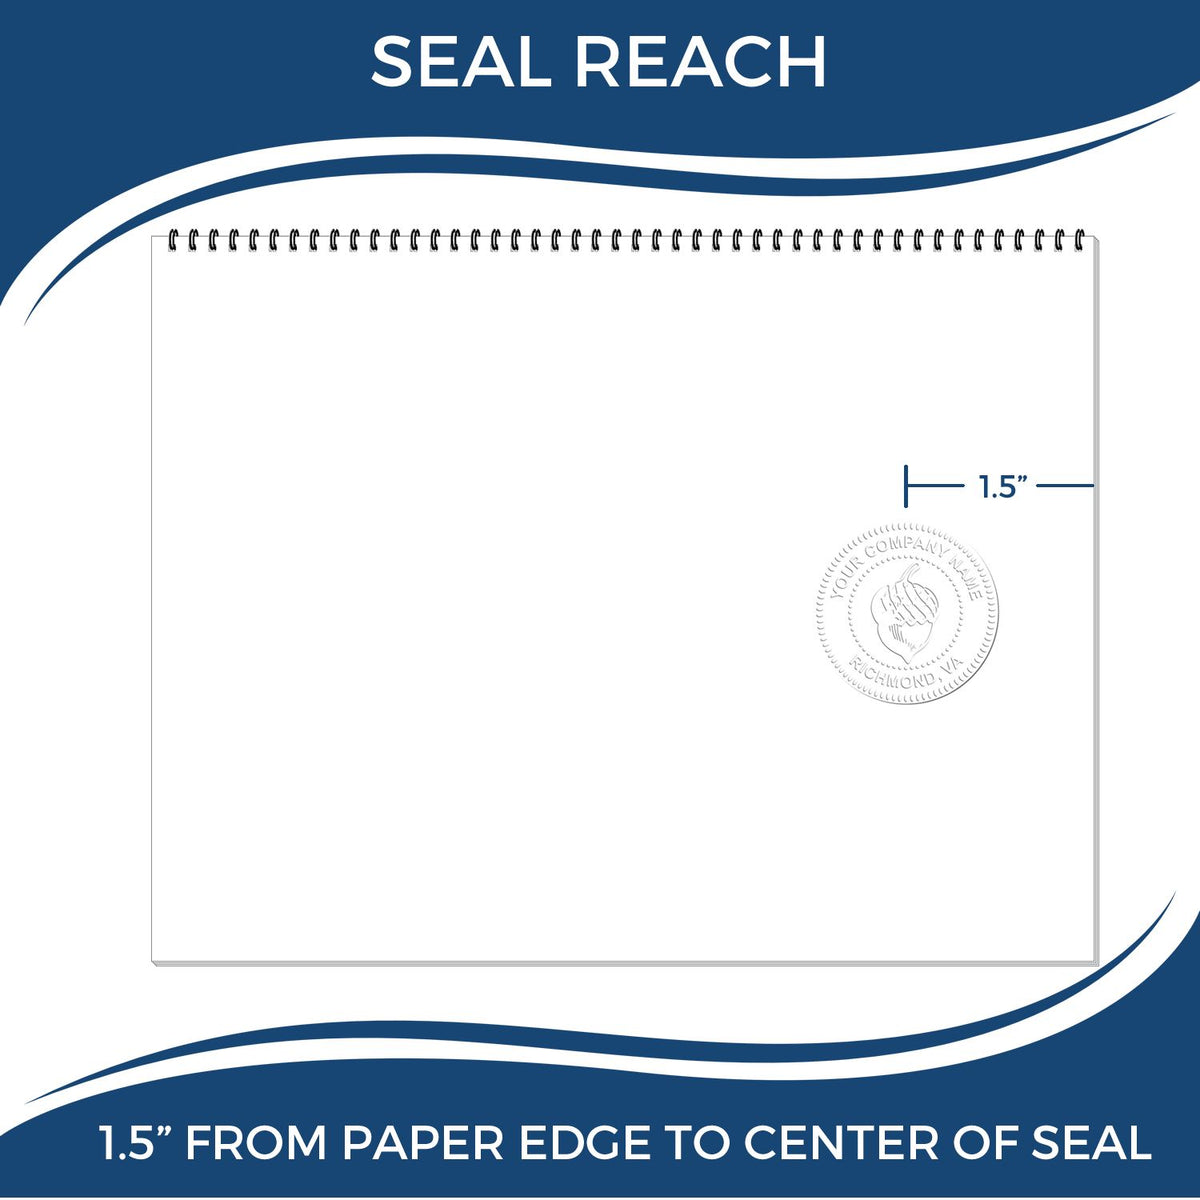 An infographic showing the seal reach which is represented by a ruler and a miniature seal image of the Handheld North Carolina Professional Geologist Embosser